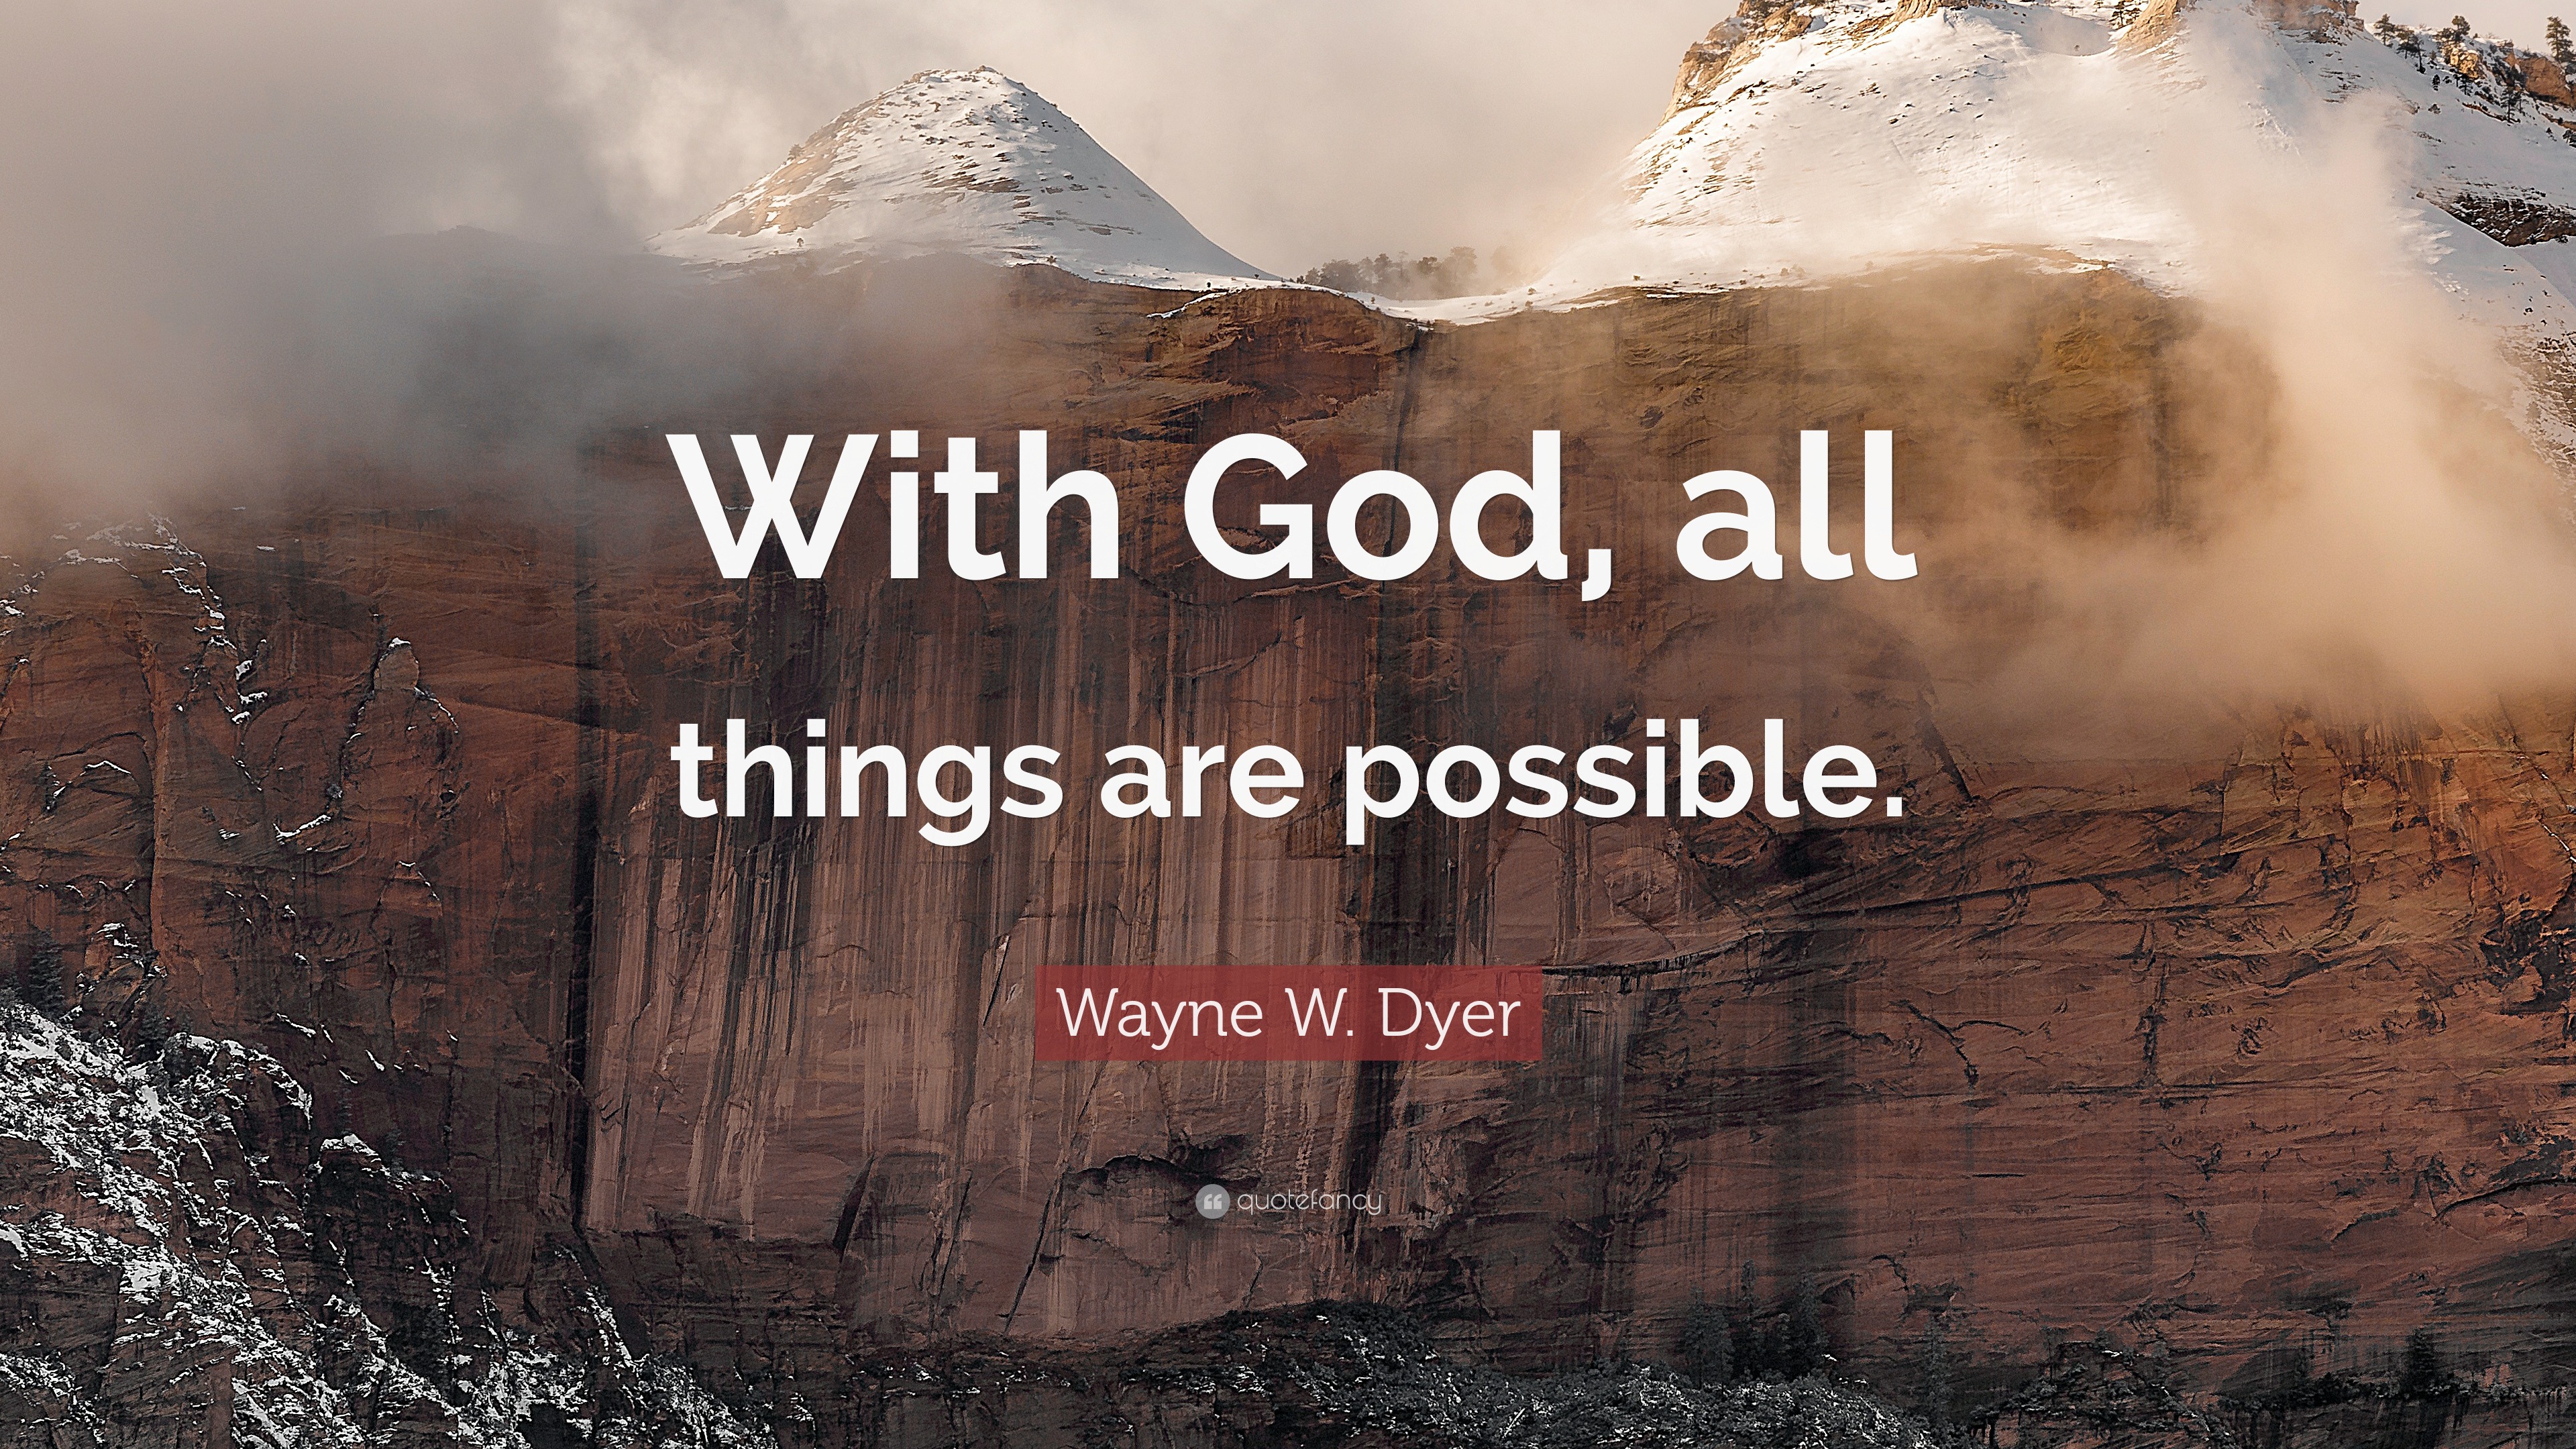 Wayne W. Dyer Quote: “With God, all things are possible.”